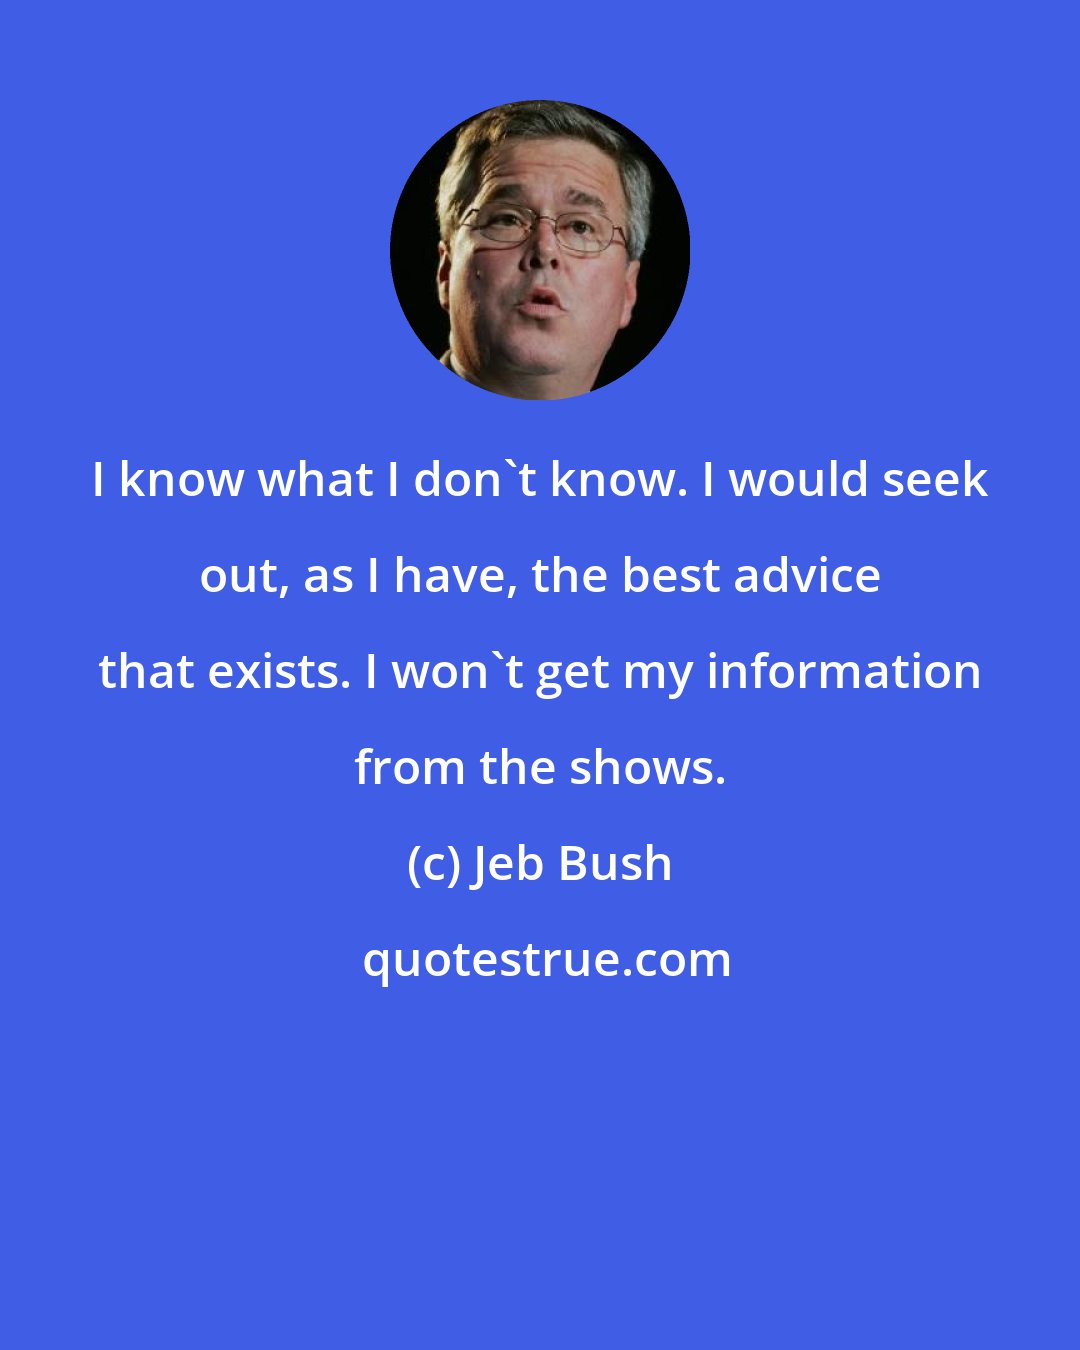 Jeb Bush: I know what I don't know. I would seek out, as I have, the best advice that exists. I won't get my information from the shows.